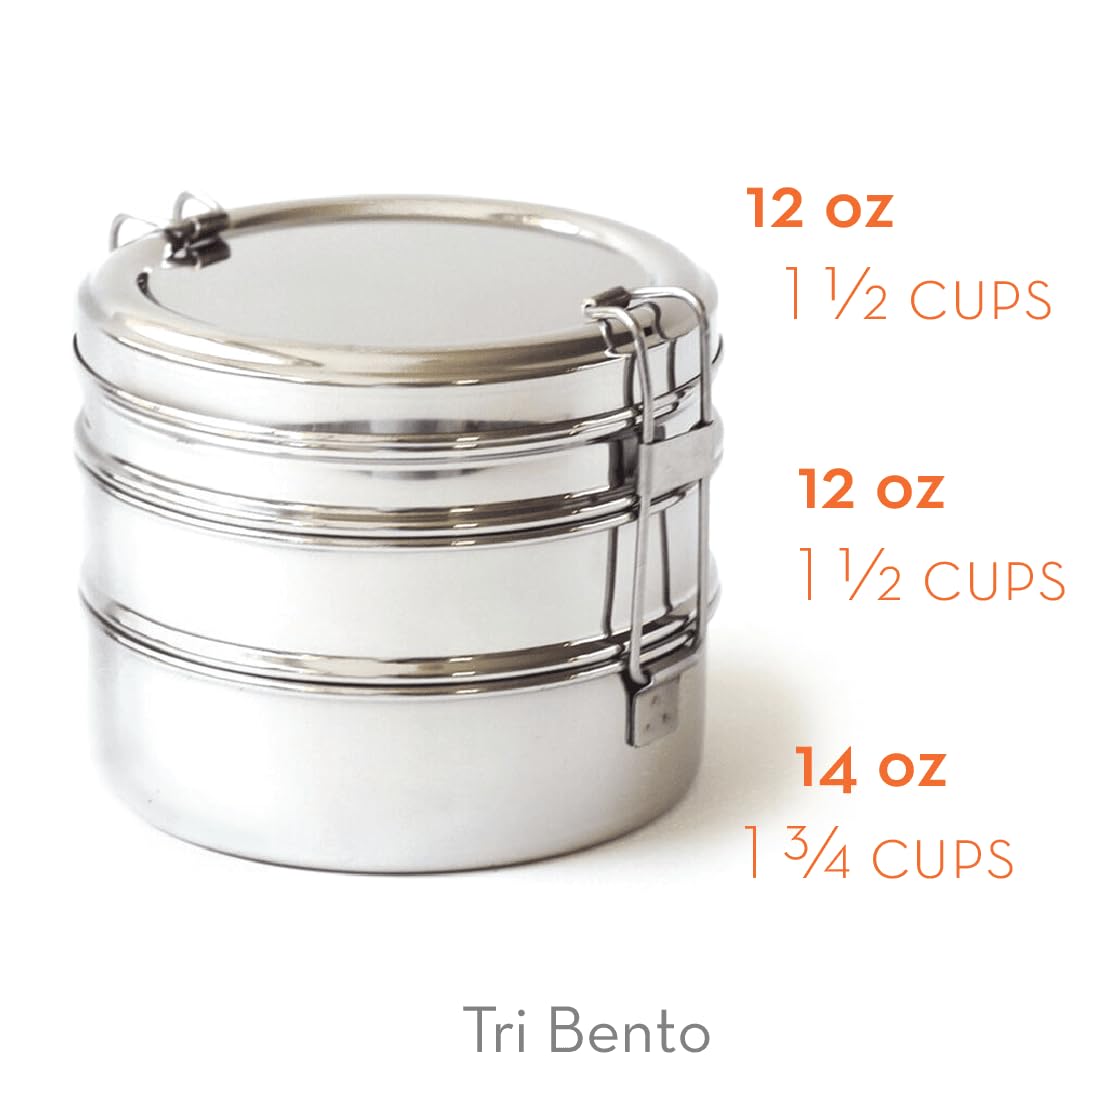 Ecolunchbox Tri Bento 3 Level Stainless Steel Bento Bowl Food Container Lunch Box - Holds 4.5 Cups - Not Leakproof